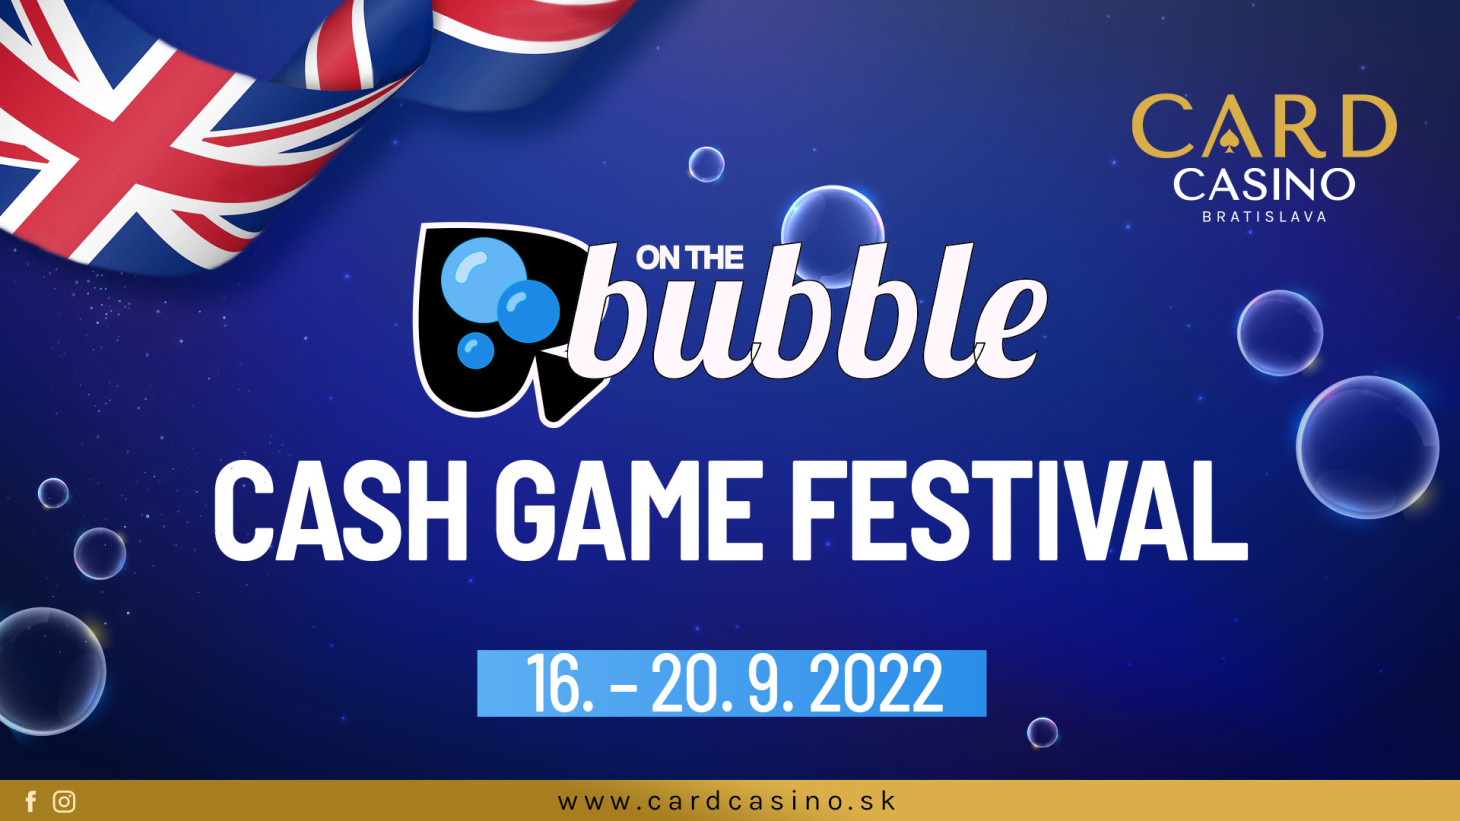 Card Casino welcomes On the bubble cash festival in September